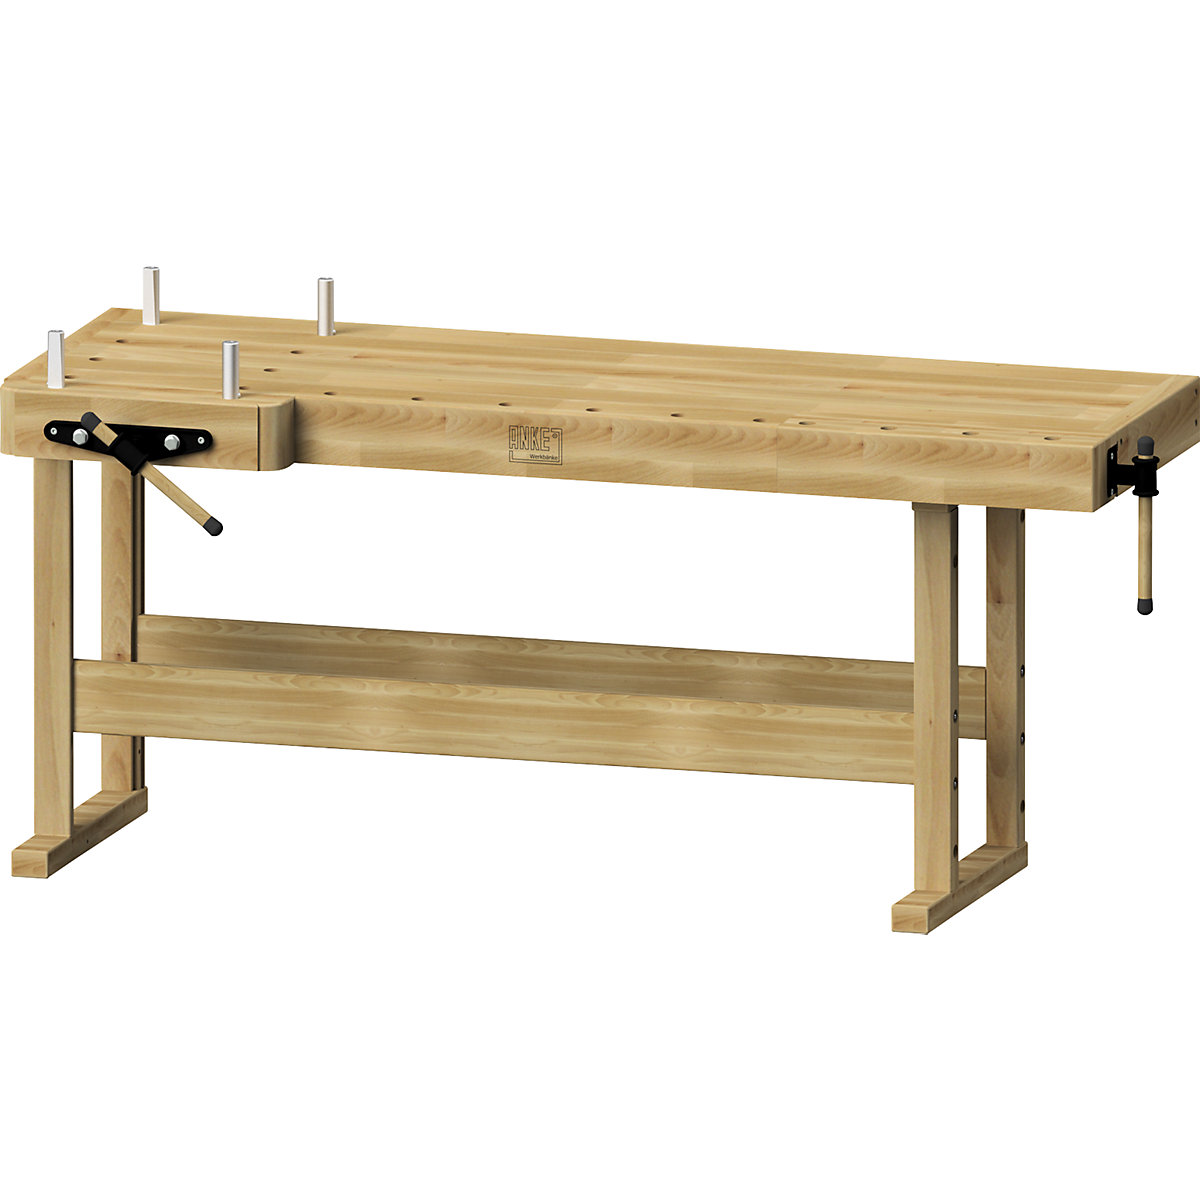 Professional planing bench - ANKE